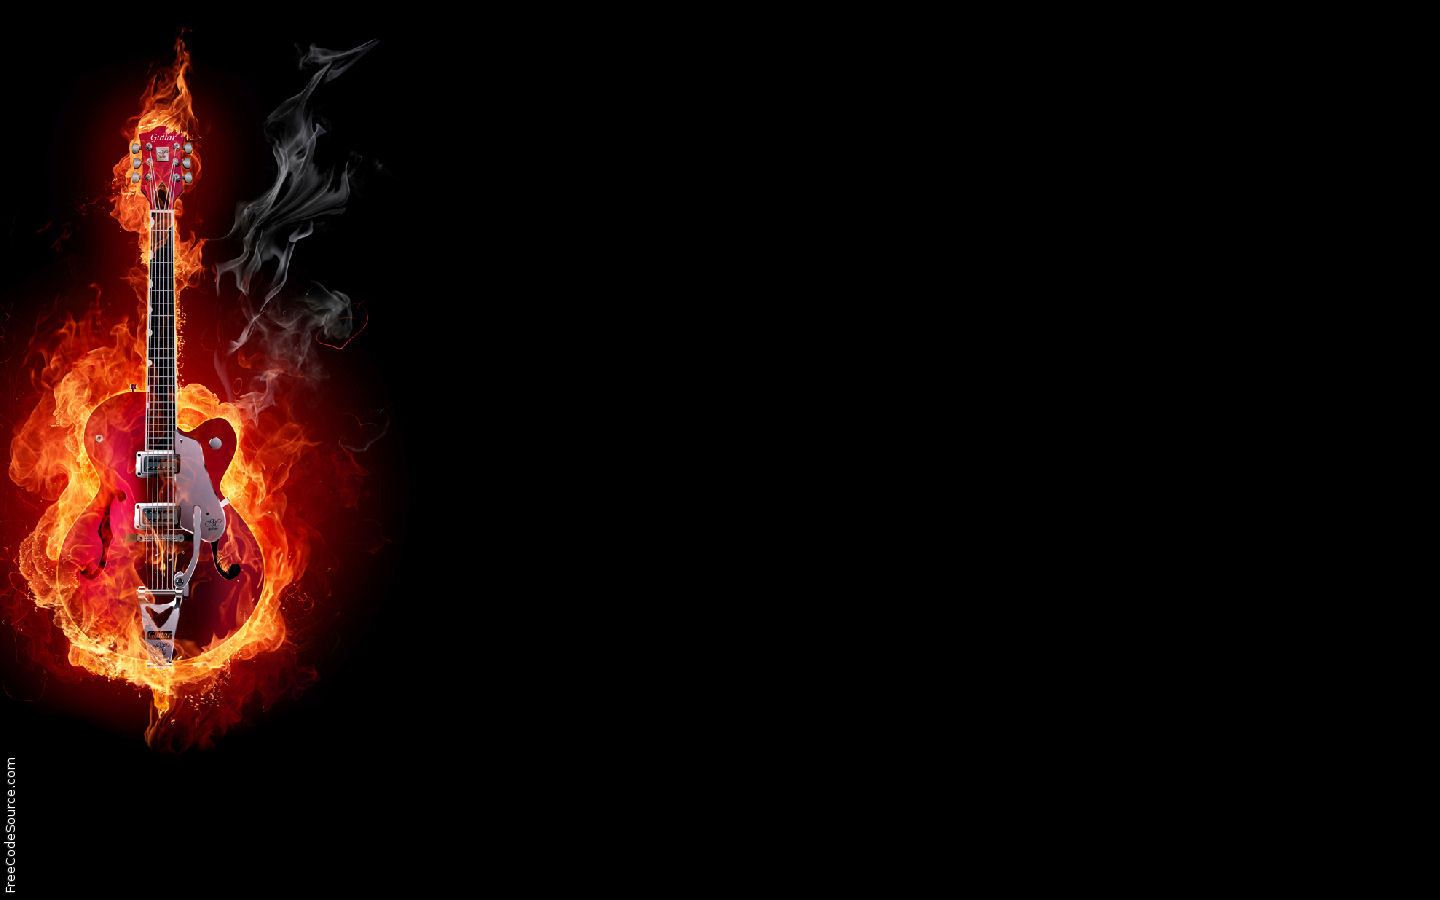 Flaming Guitar Twitter Backgrounds, Flaming Guitar Twitter Layouts ...